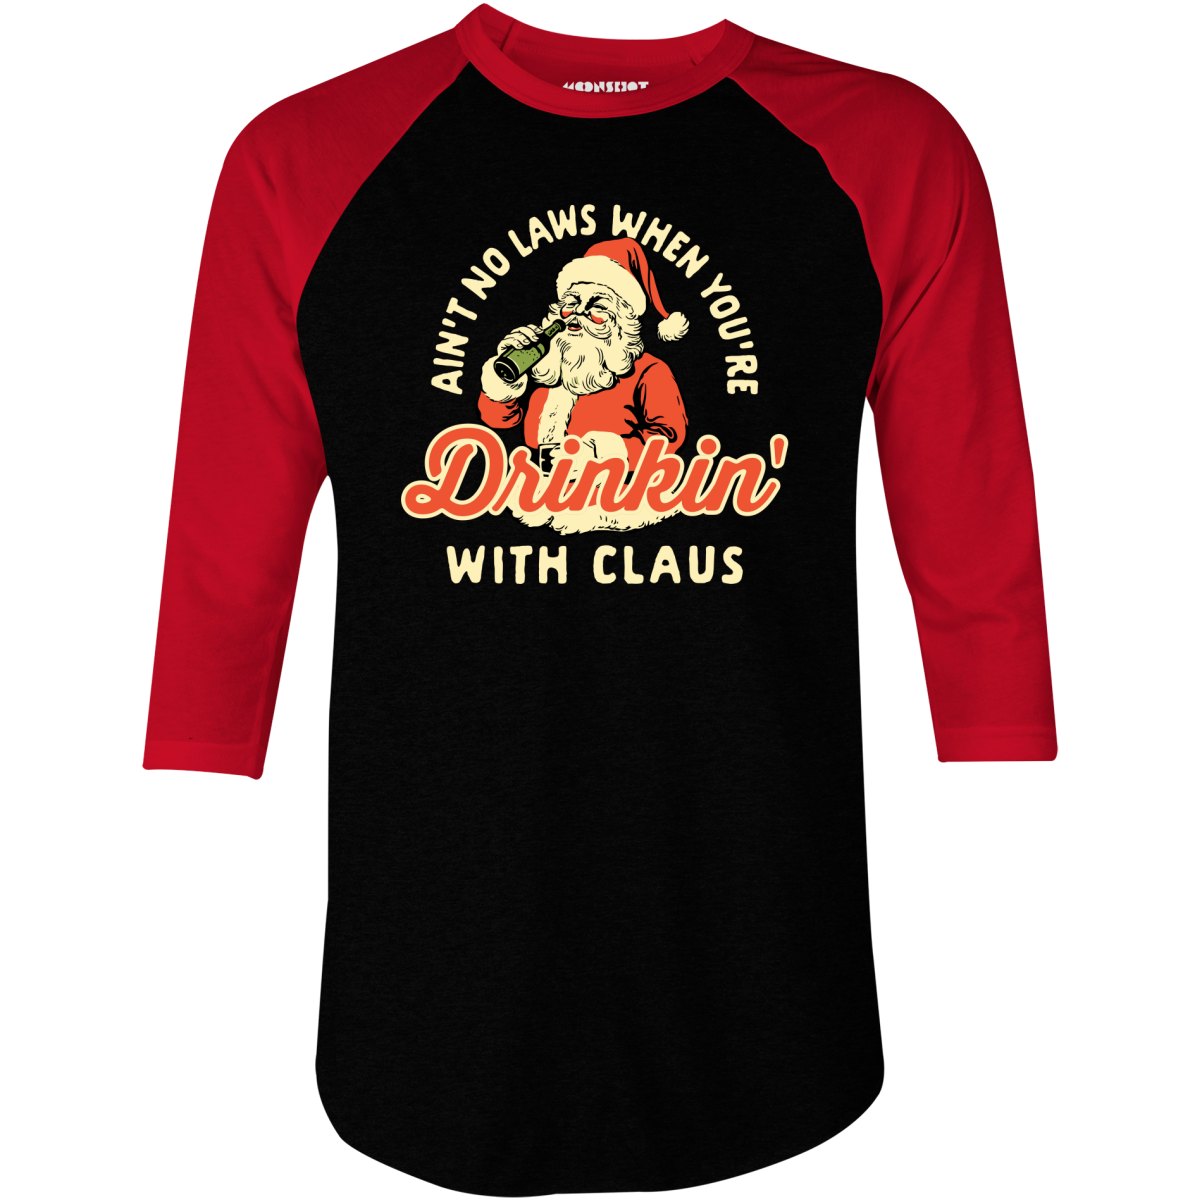 Ain't No Laws When You're Drinkin' With Claus - 3/4 Sleeve Raglan T-Shirt